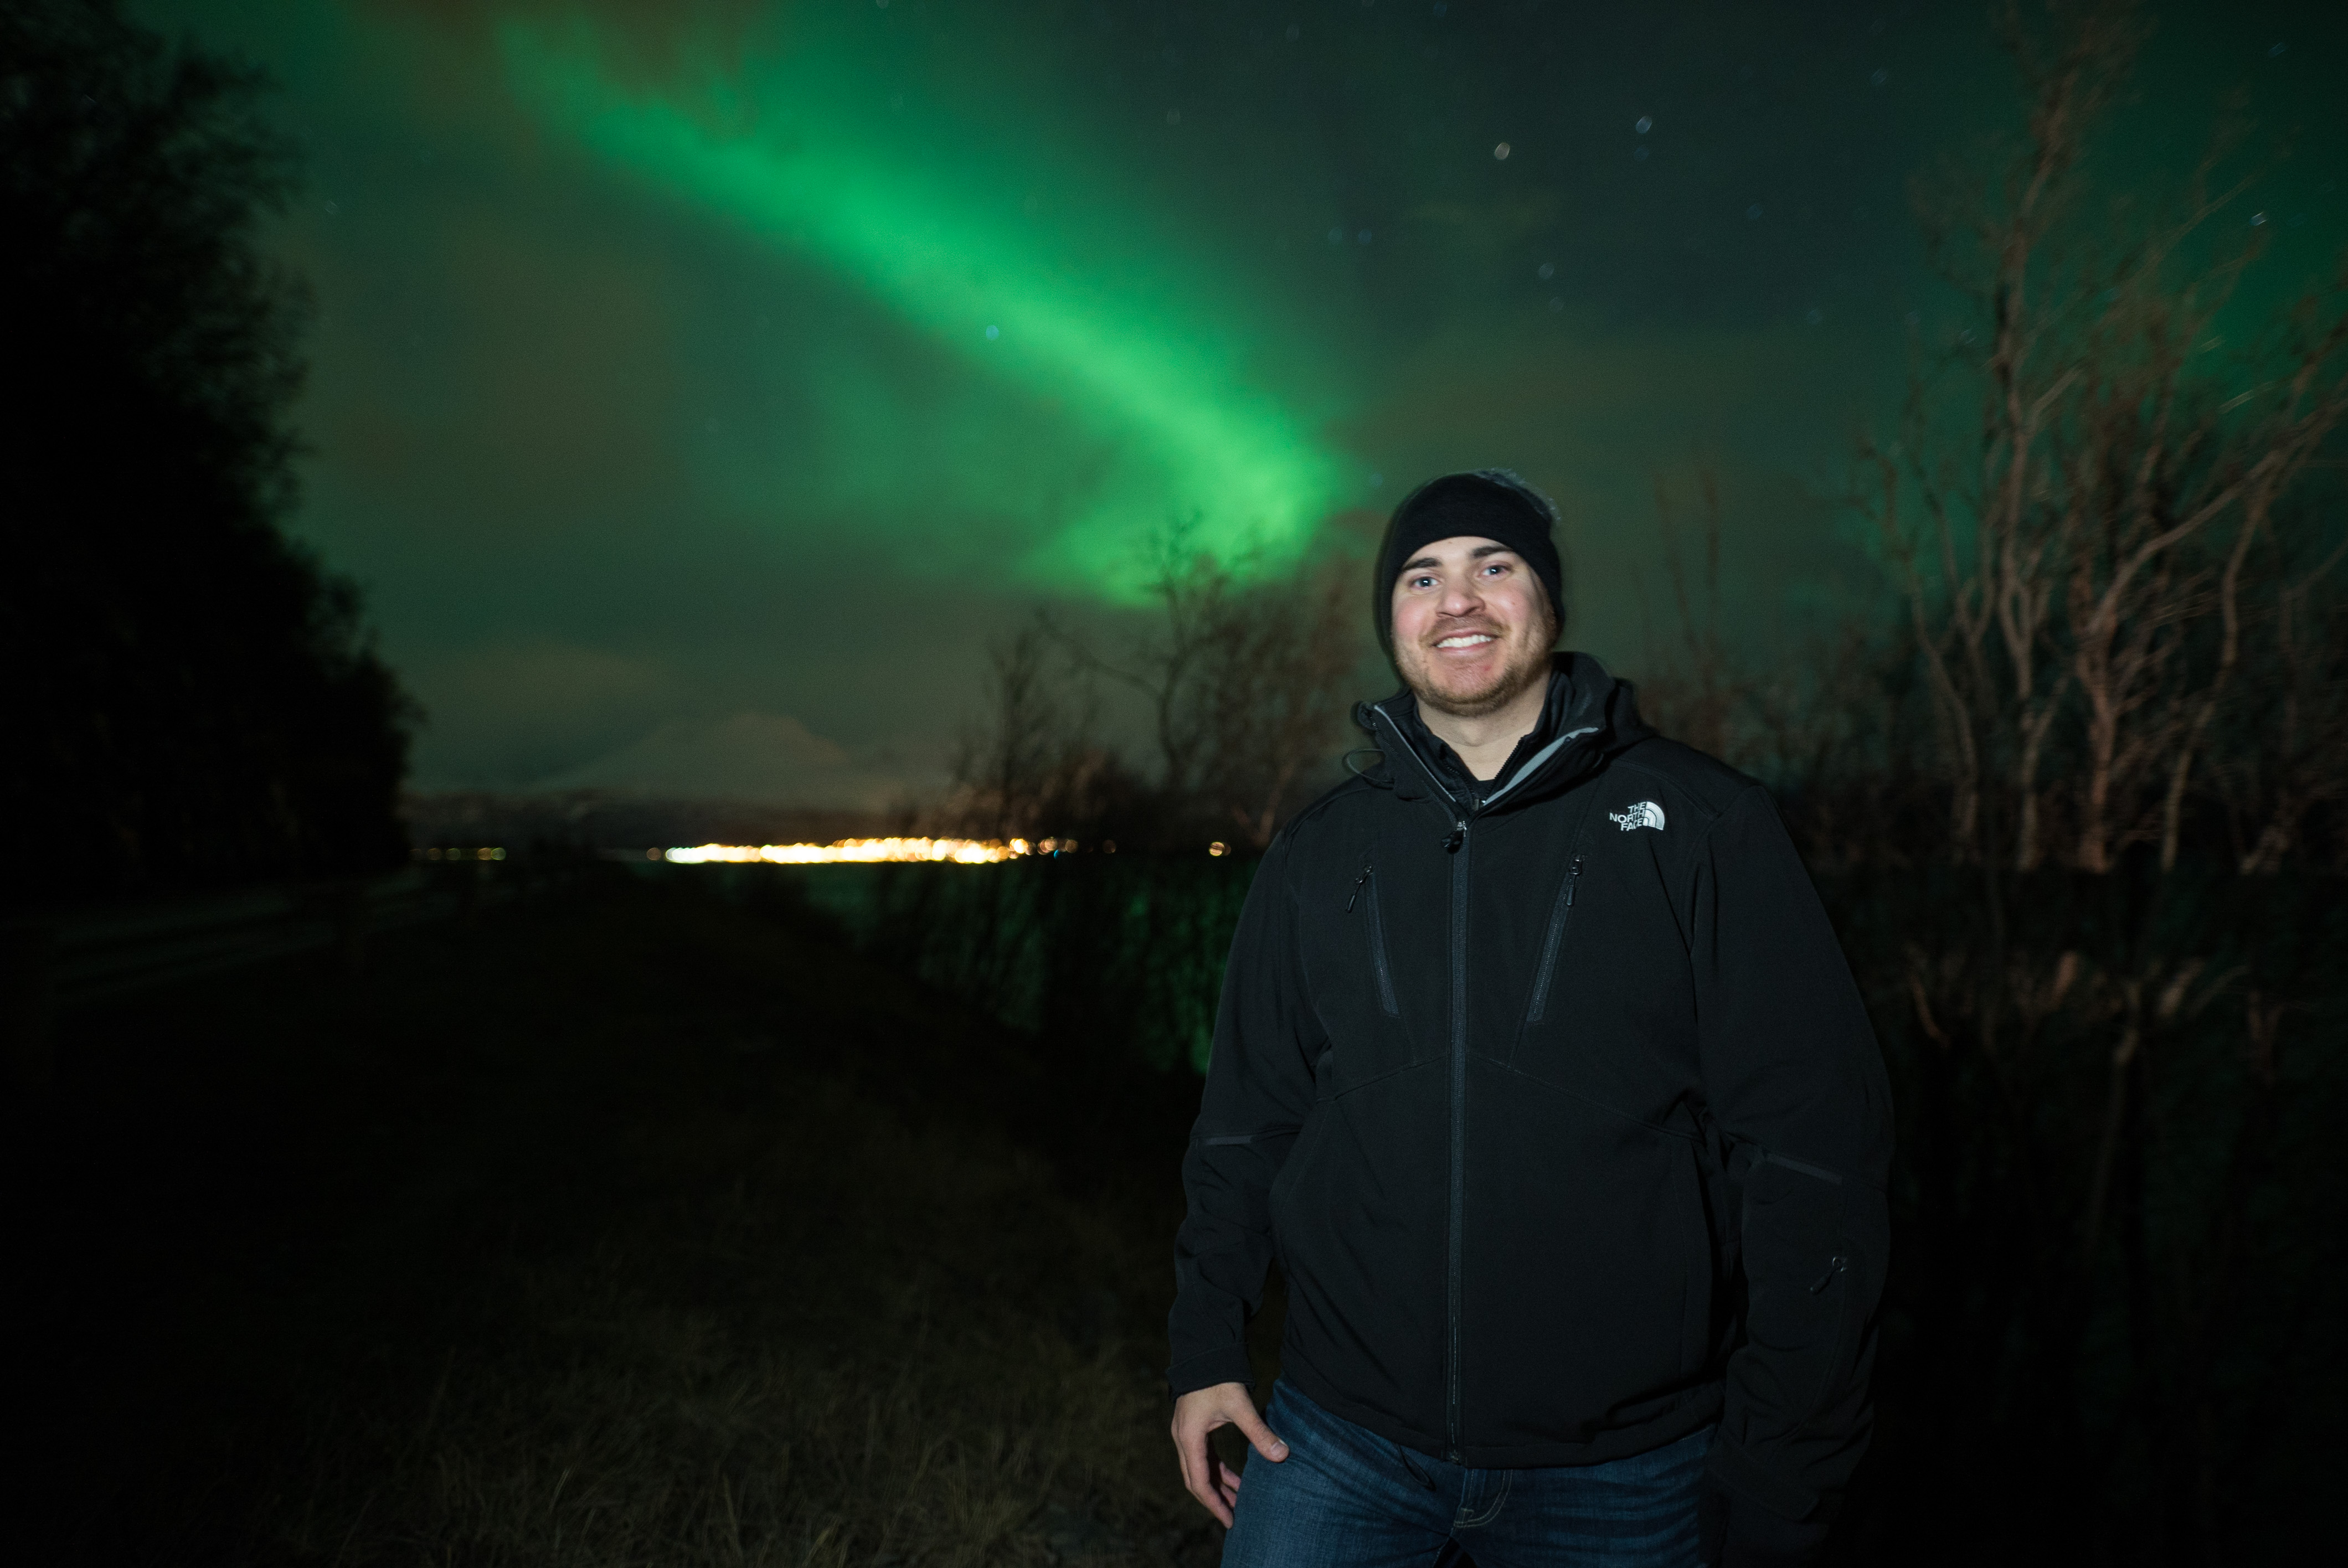 Man with Northern lights